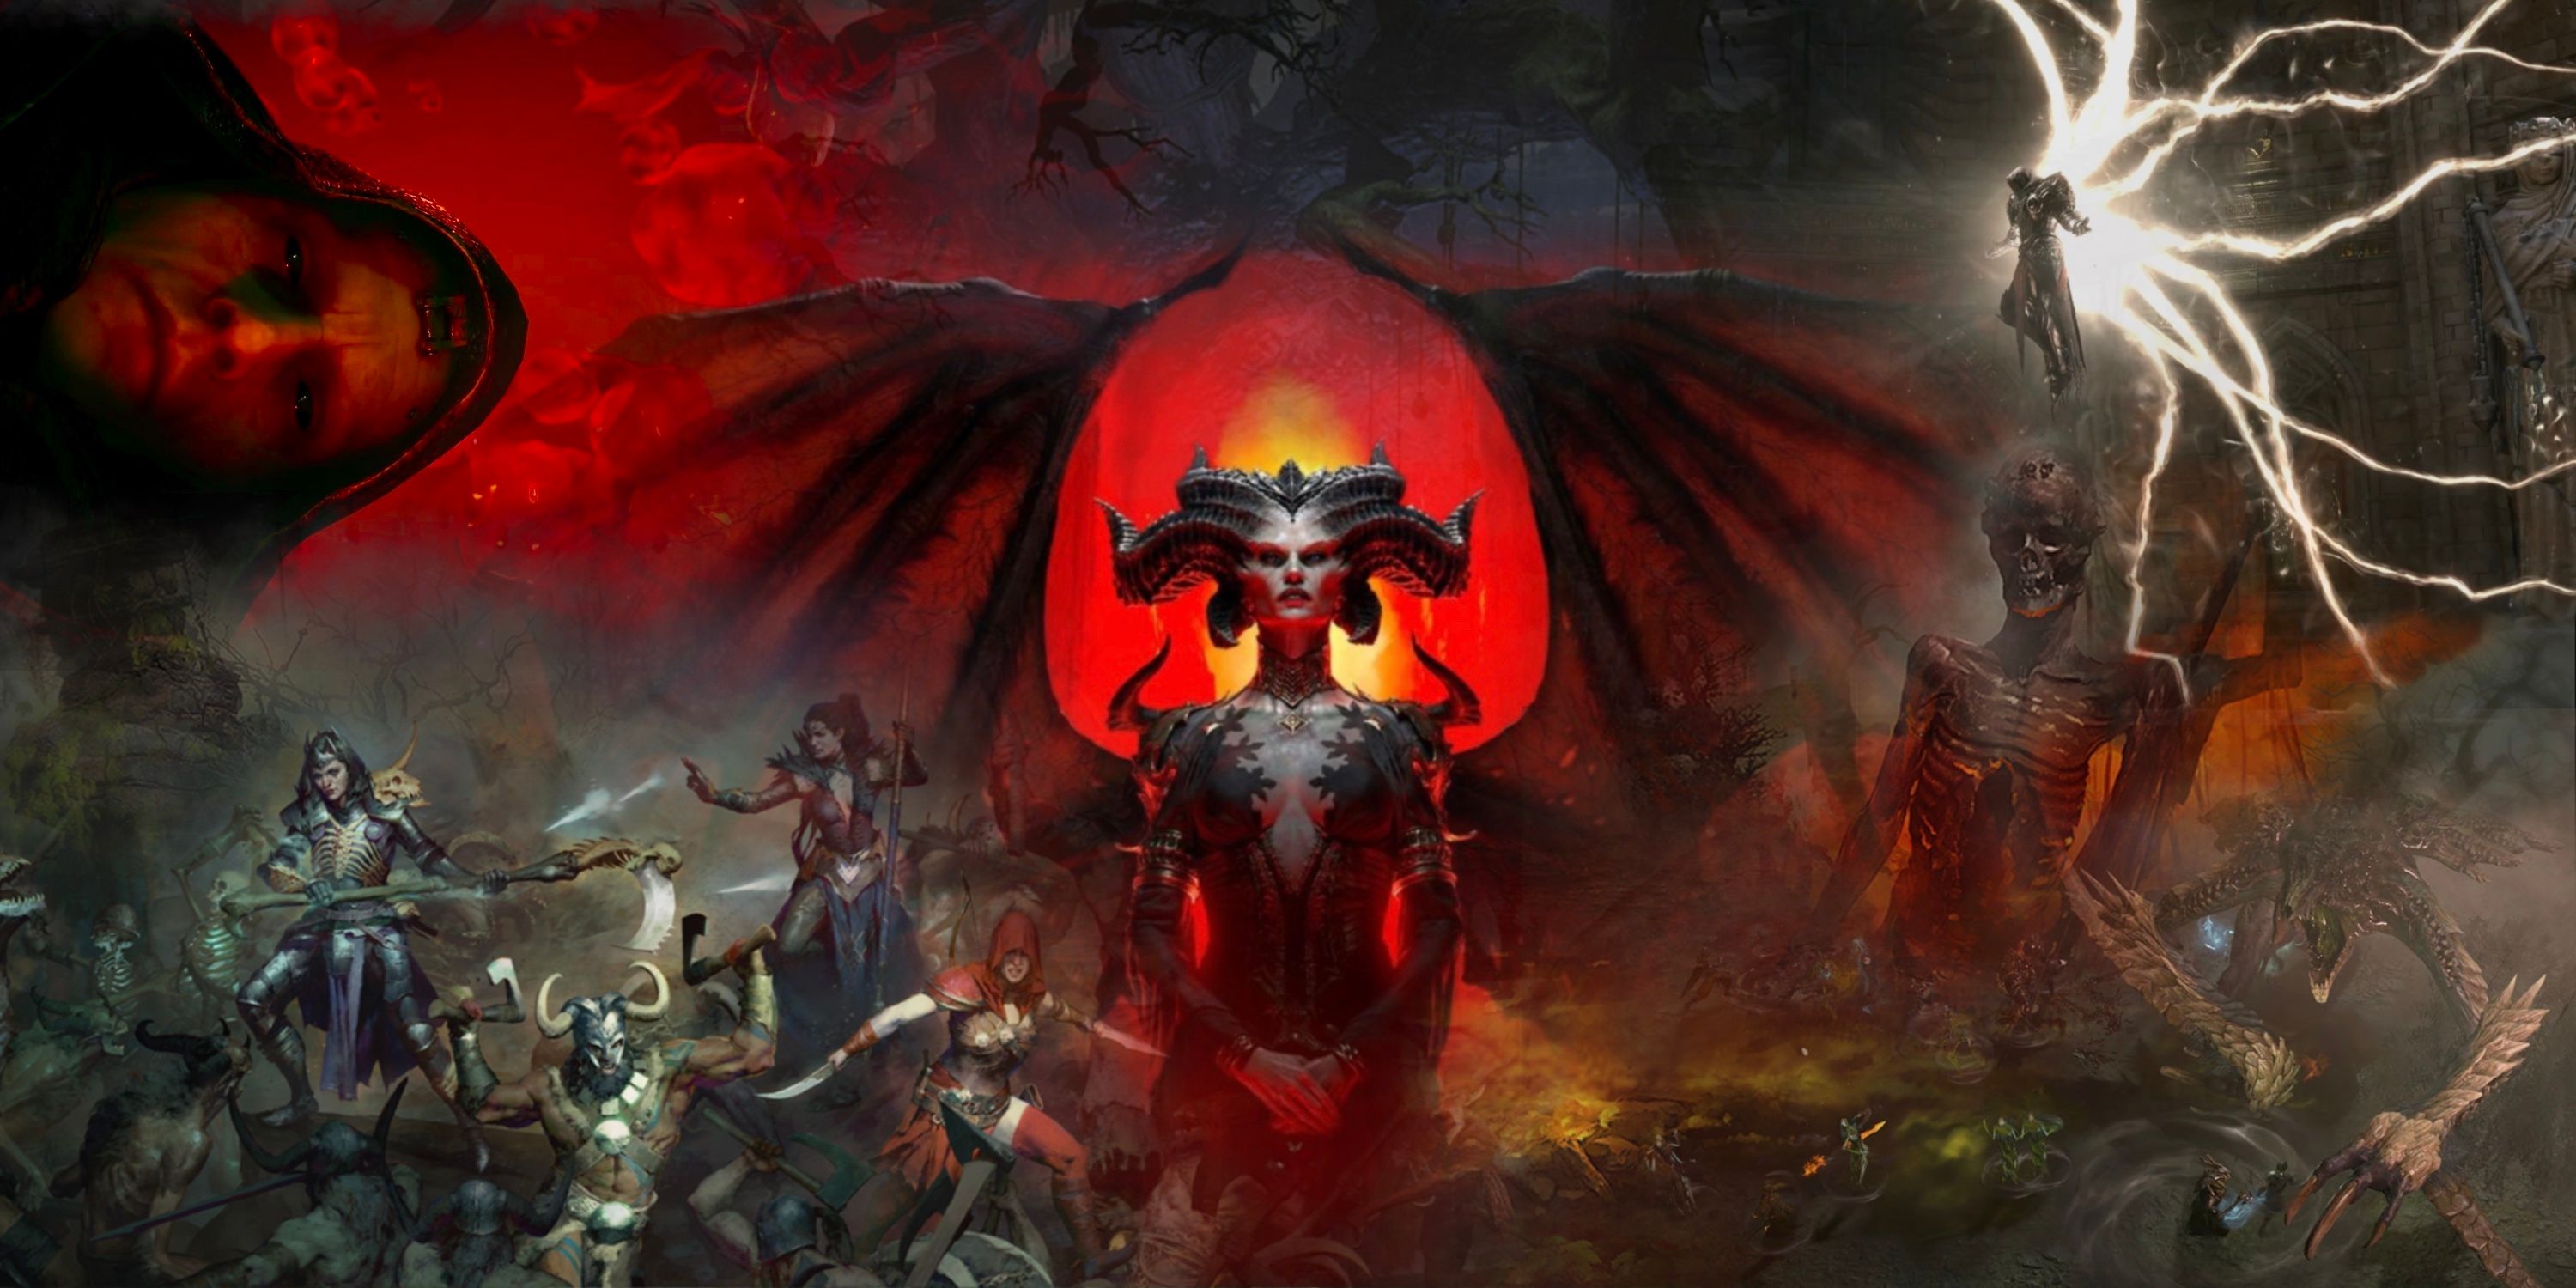 Diablo 4 guide: Everything you need to survive Sanctuary